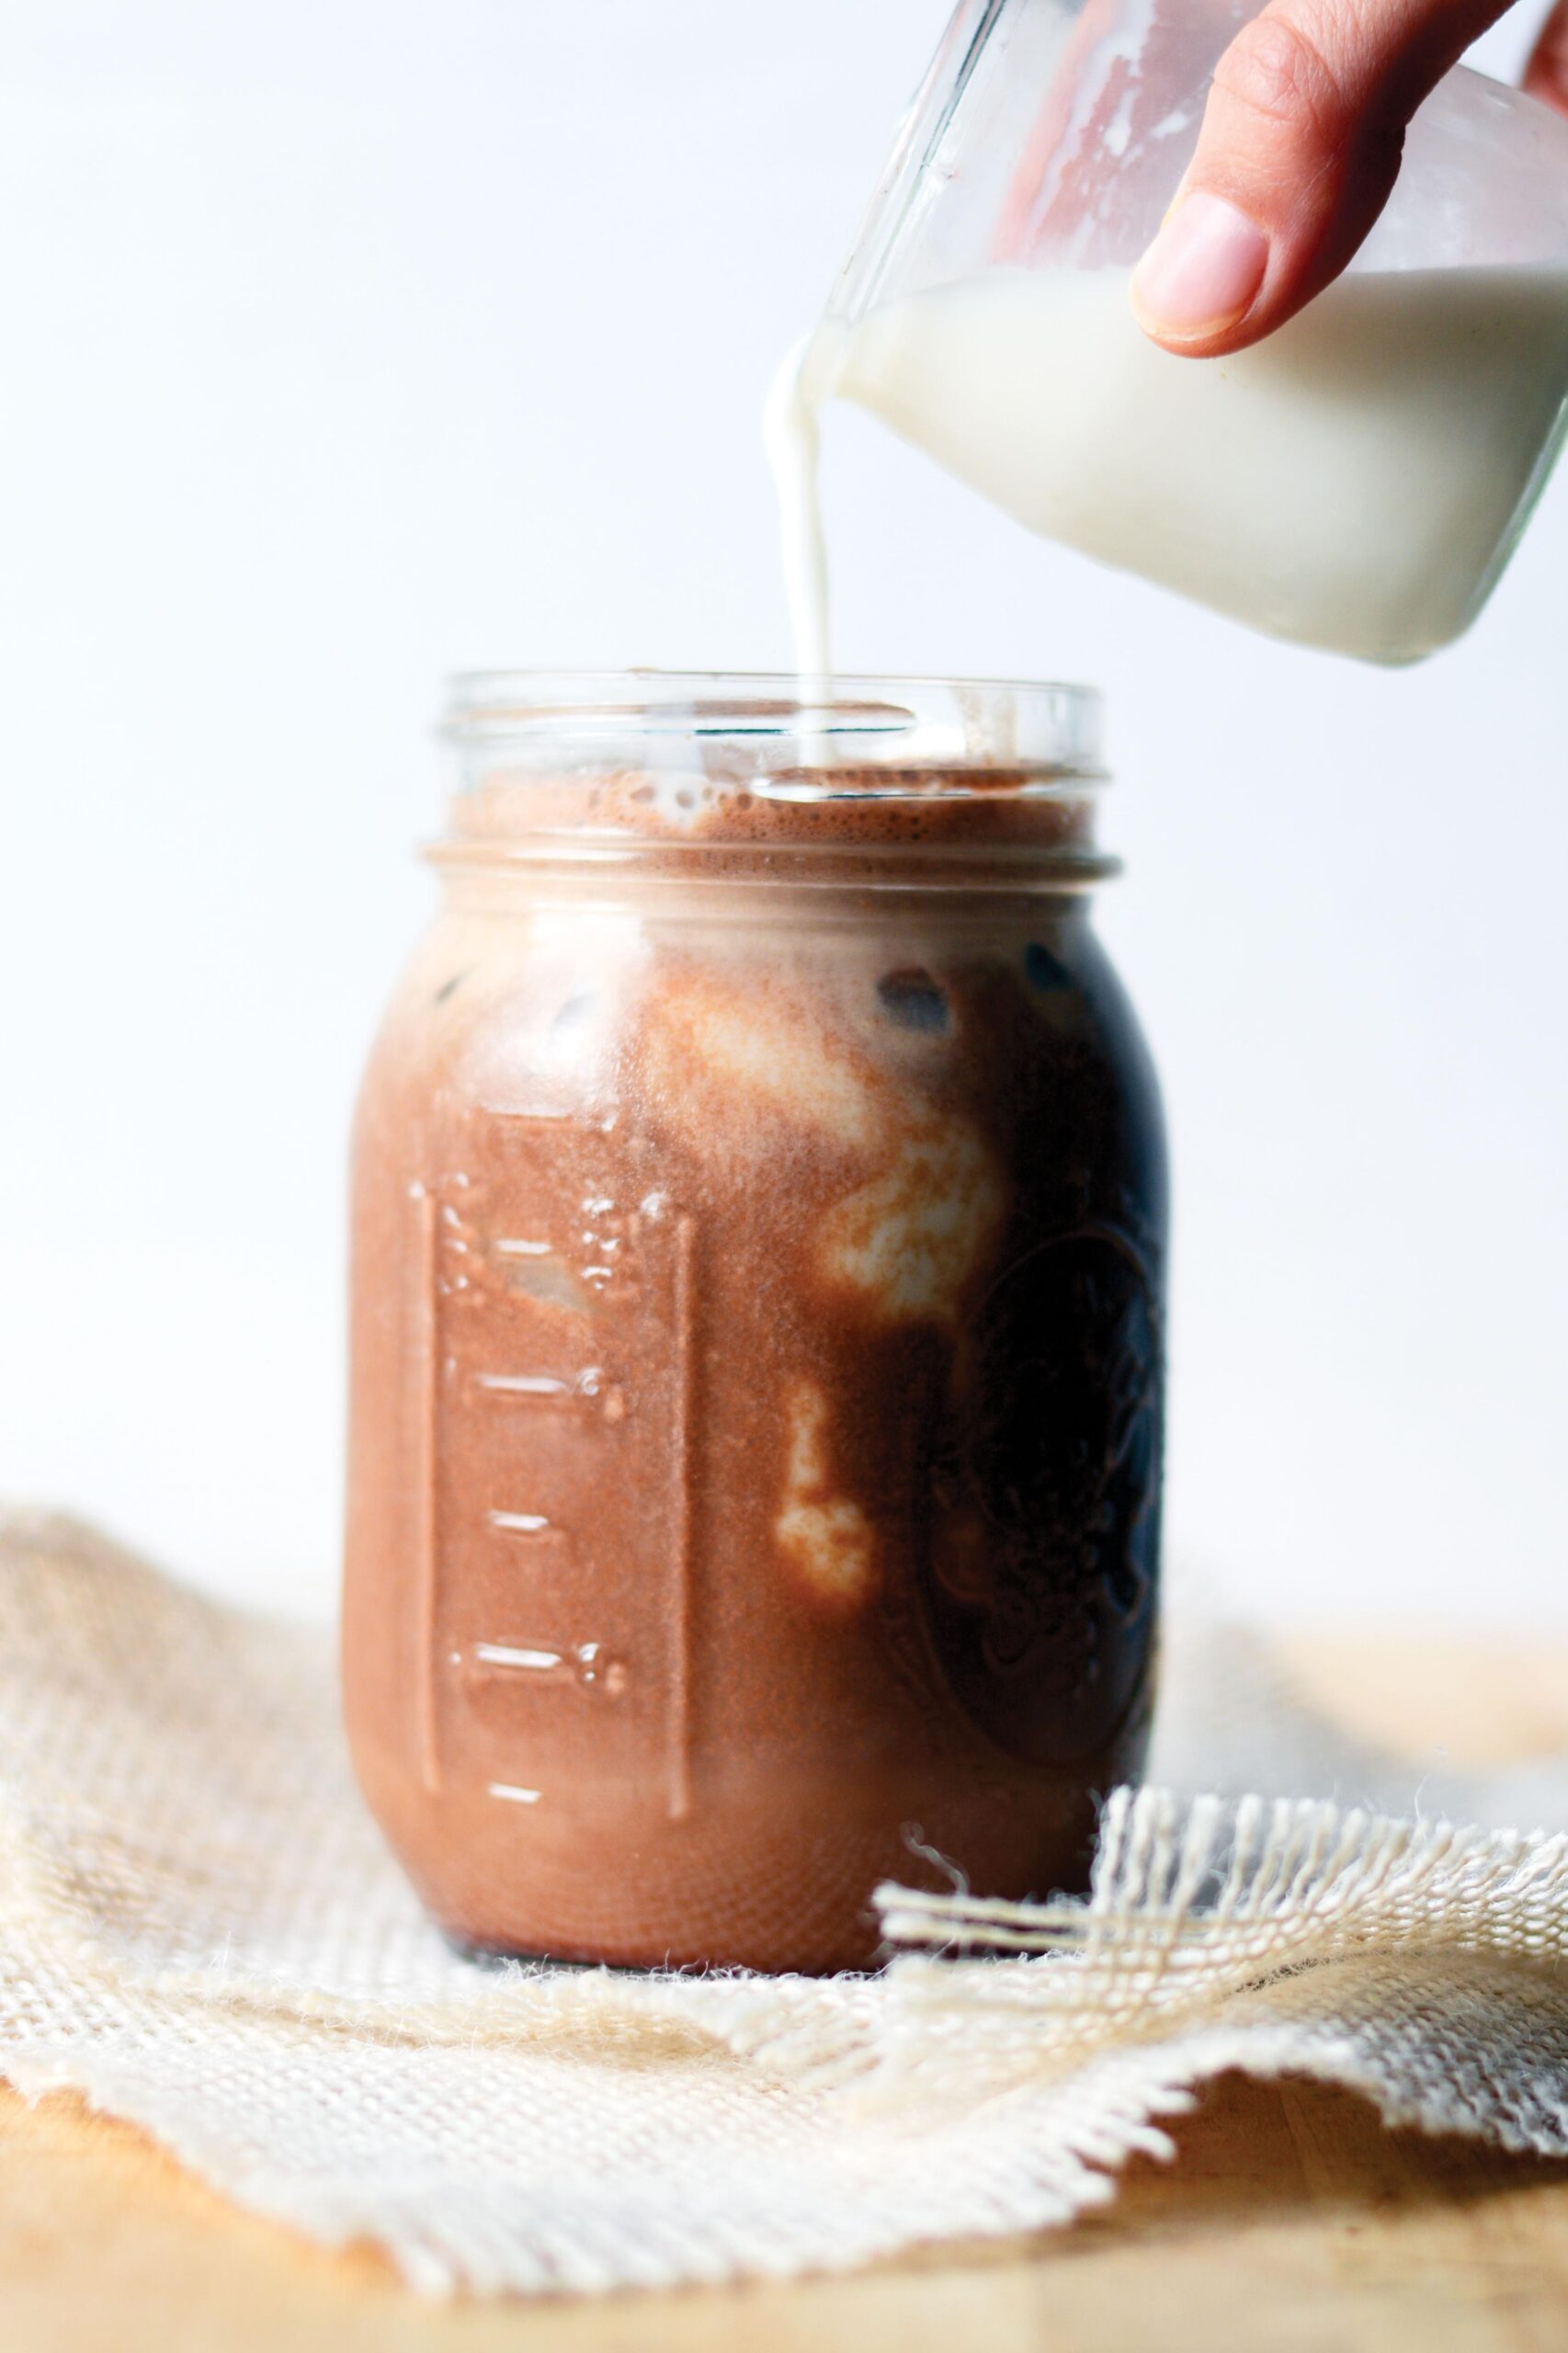  Forget about the sugar rush, fuel your day with this amazing iced mocha recipe.